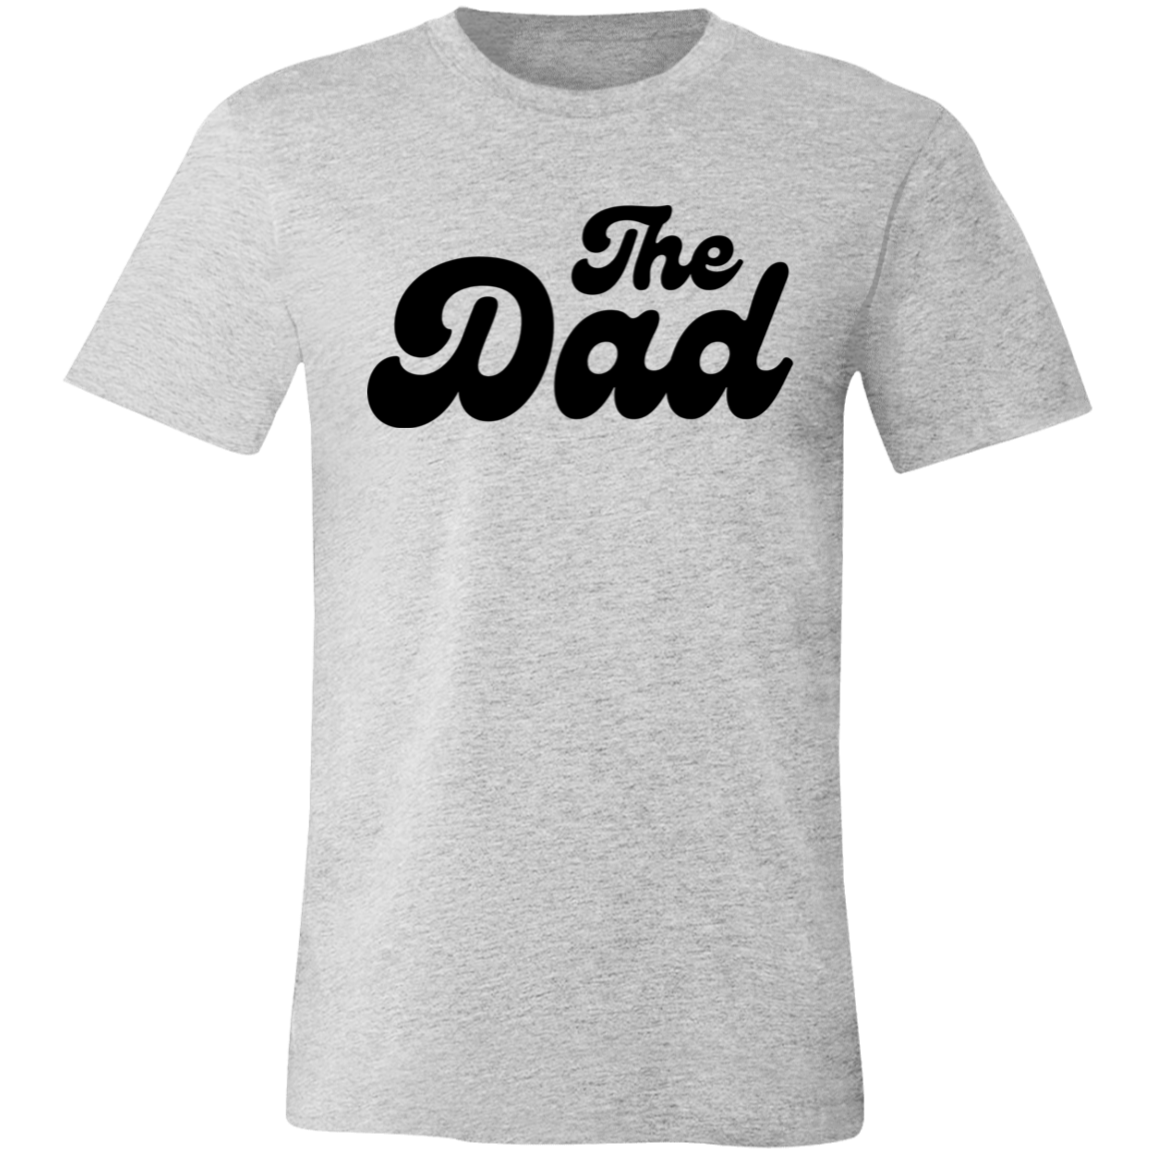 The Dad, The Mom, and The Baby T-Shirts